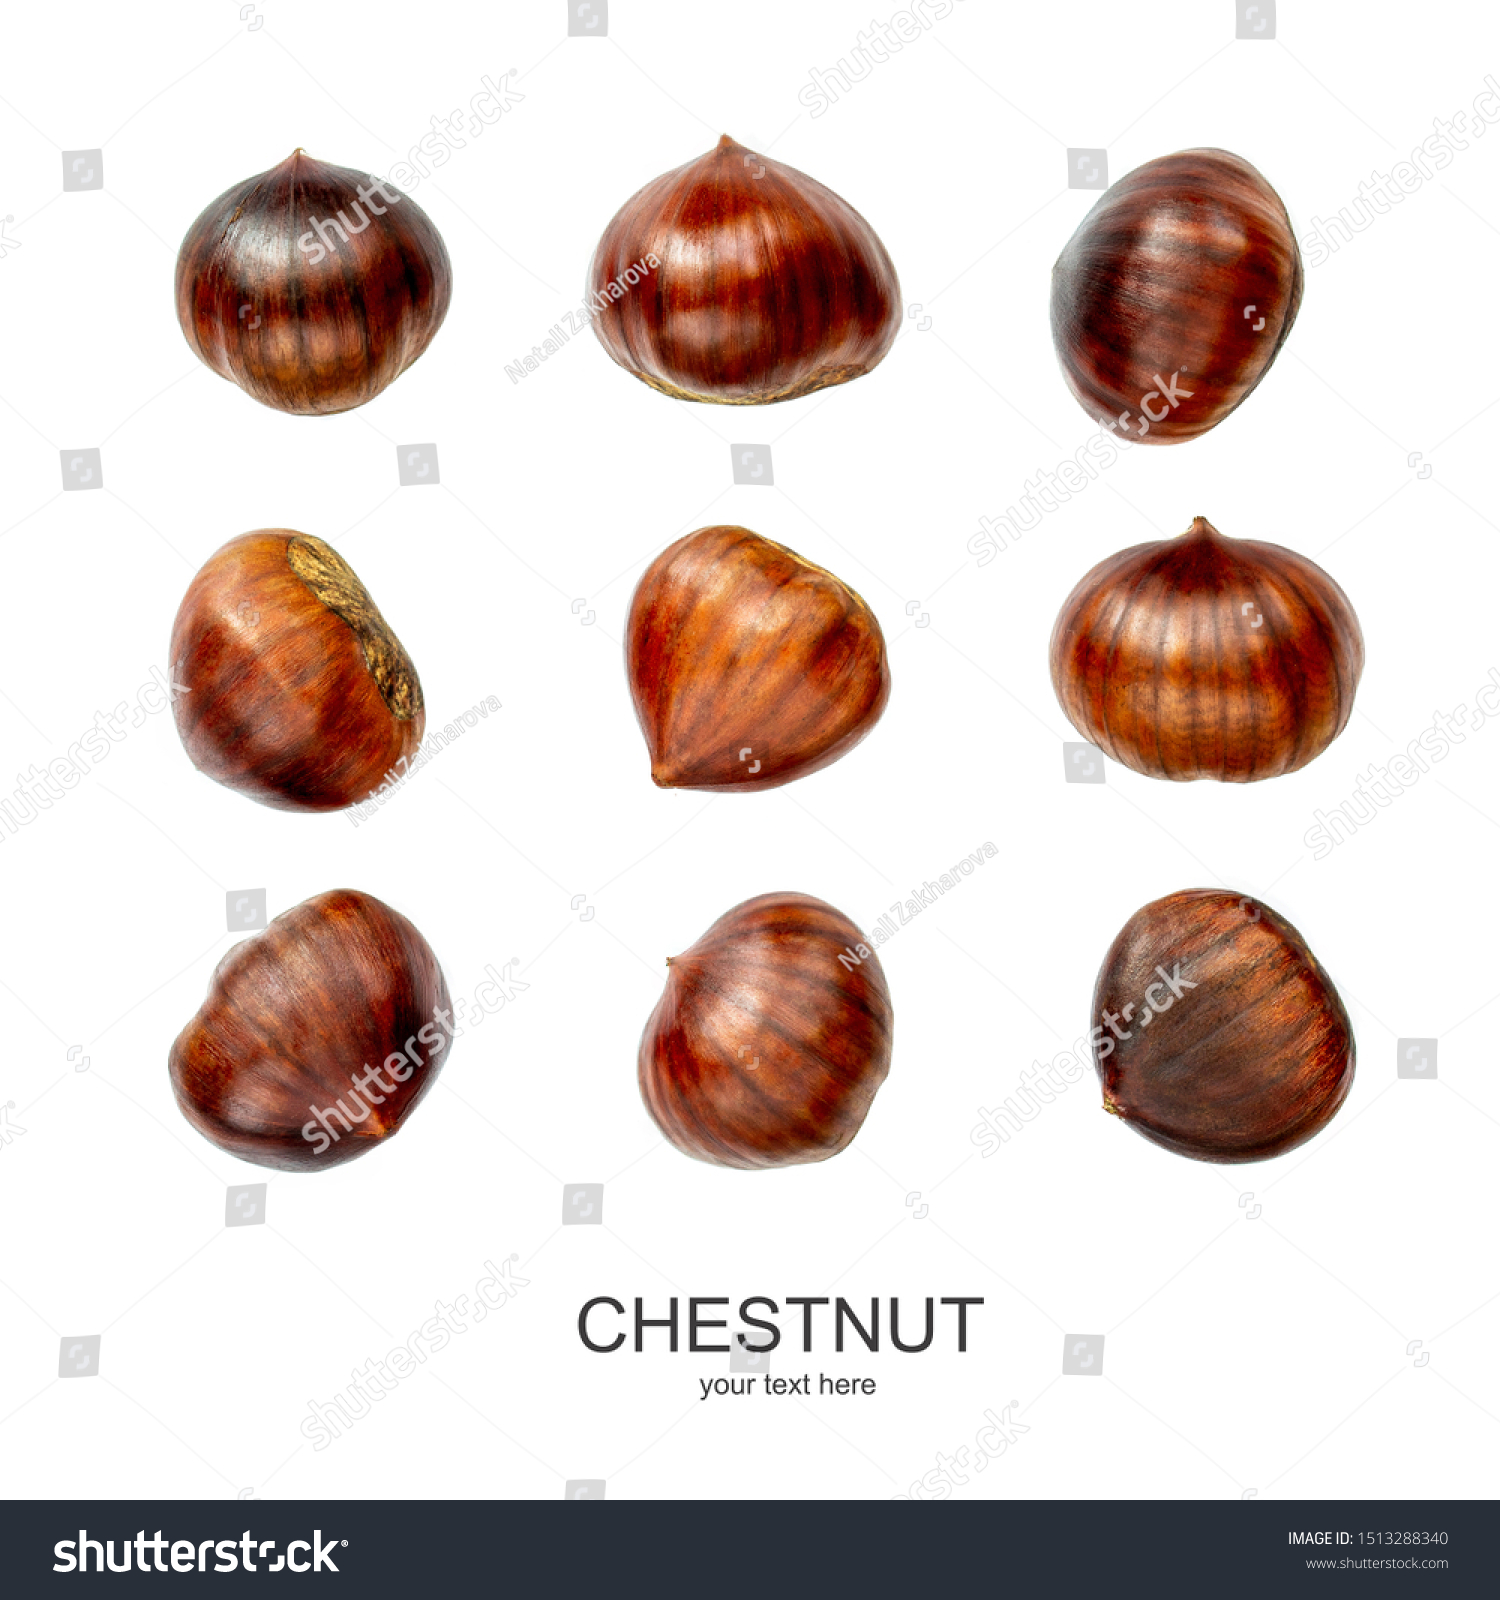 Chestnut Pattern. Creative layout of Chestnuts isolated  on white background. Top view. Flat lay #1513288340